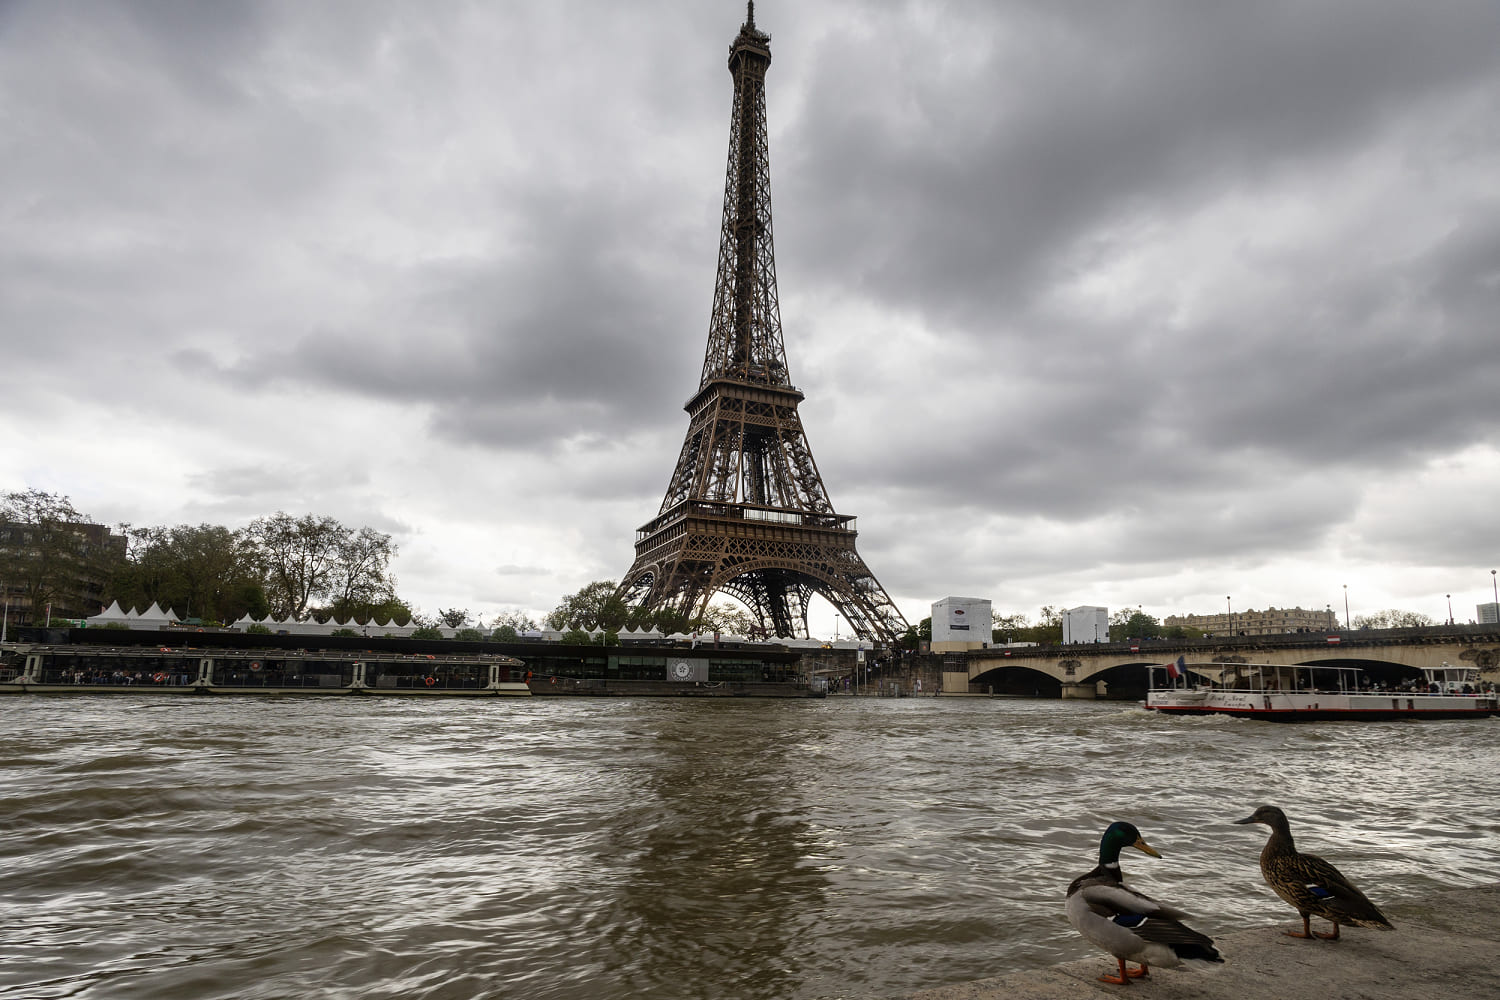 Levels of contamination in the Seine remain unsafe for Paris Olympians, report says